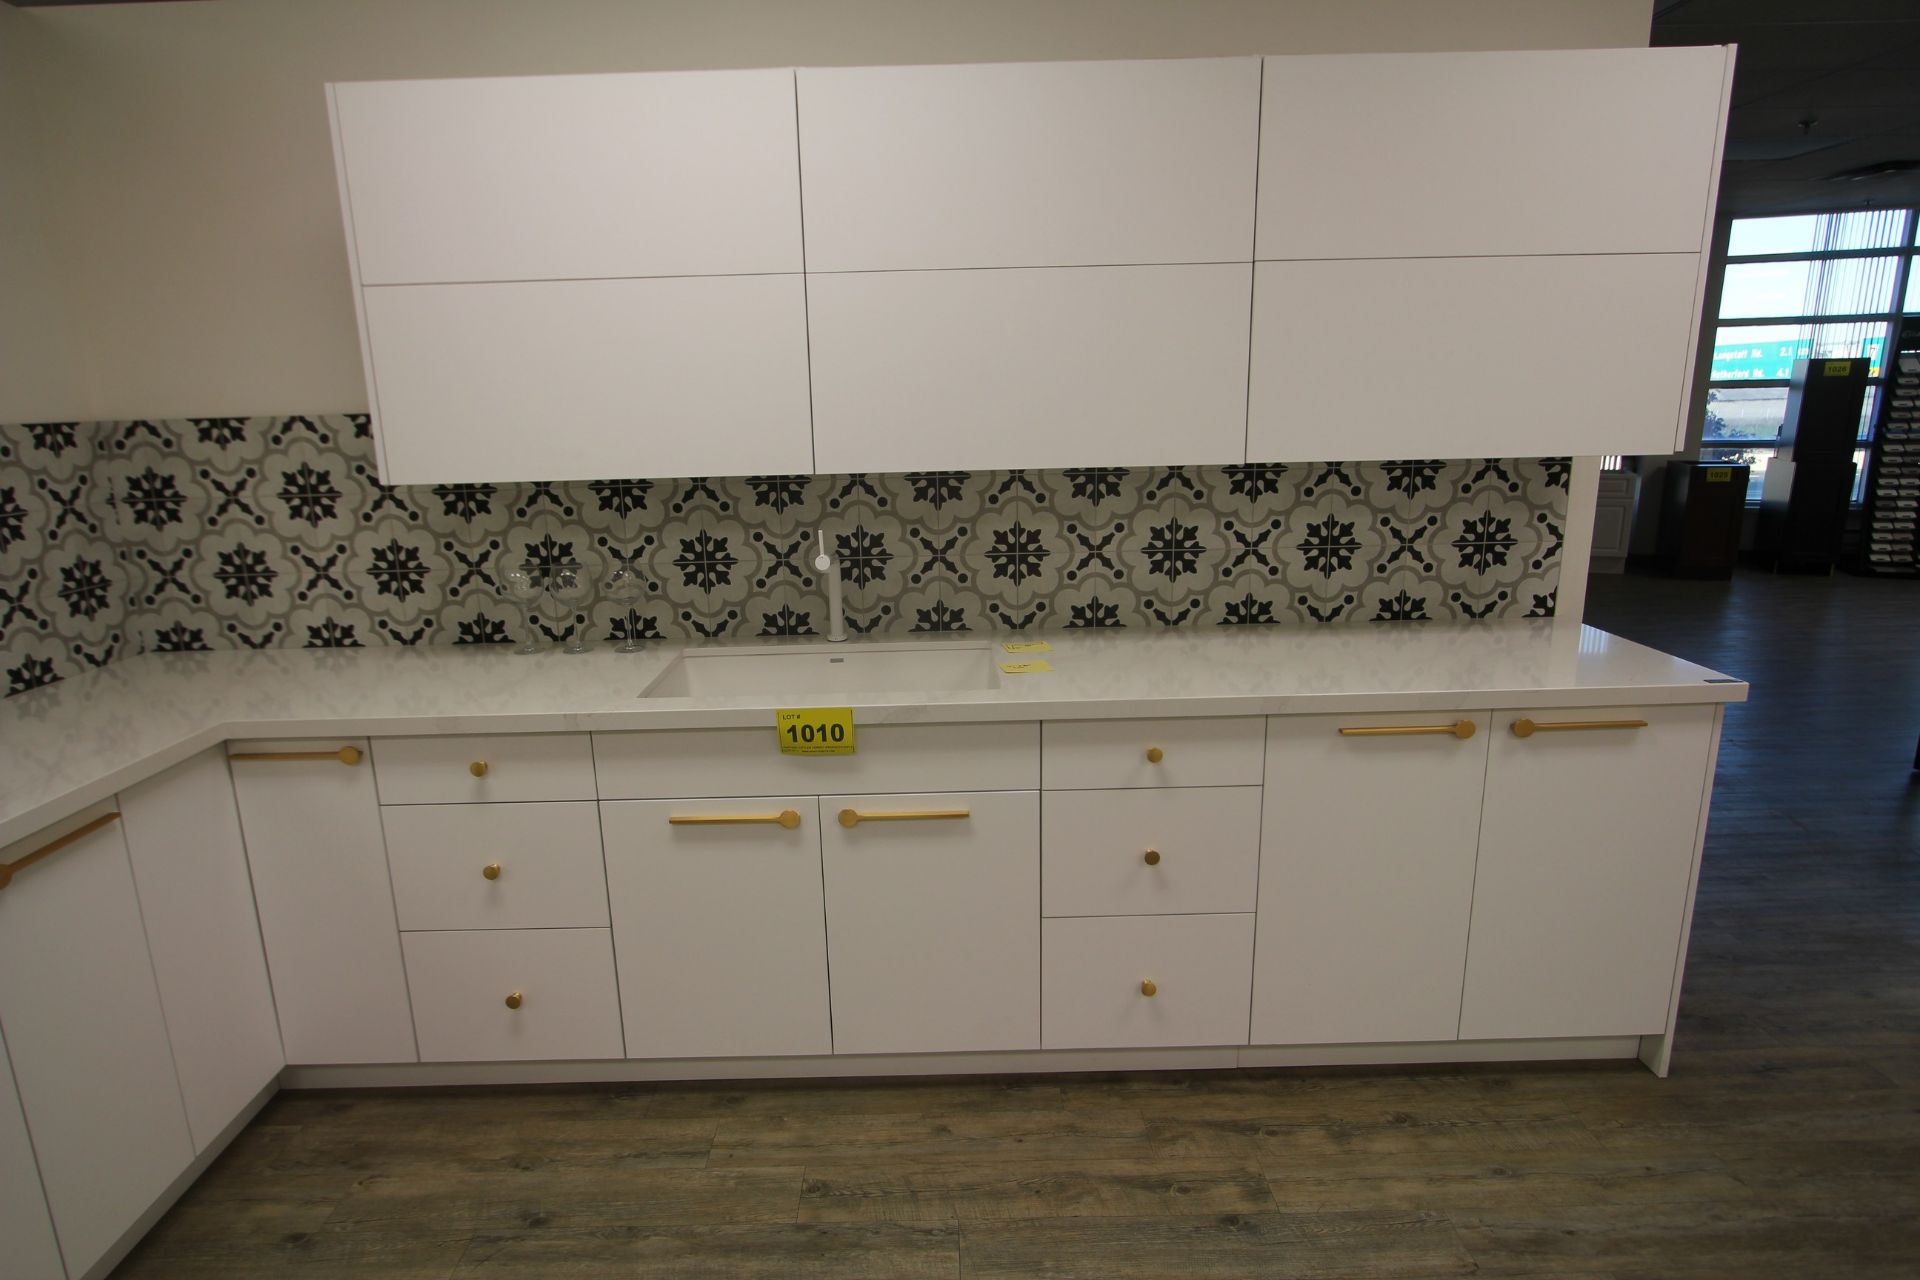 SHOWROOM DISPLAY KITCHEN, 145"L X 62"W, 17" X 30" SINK W/ CABINETRY, COUNTERTOP, SINK, FAUCET, - Image 2 of 7